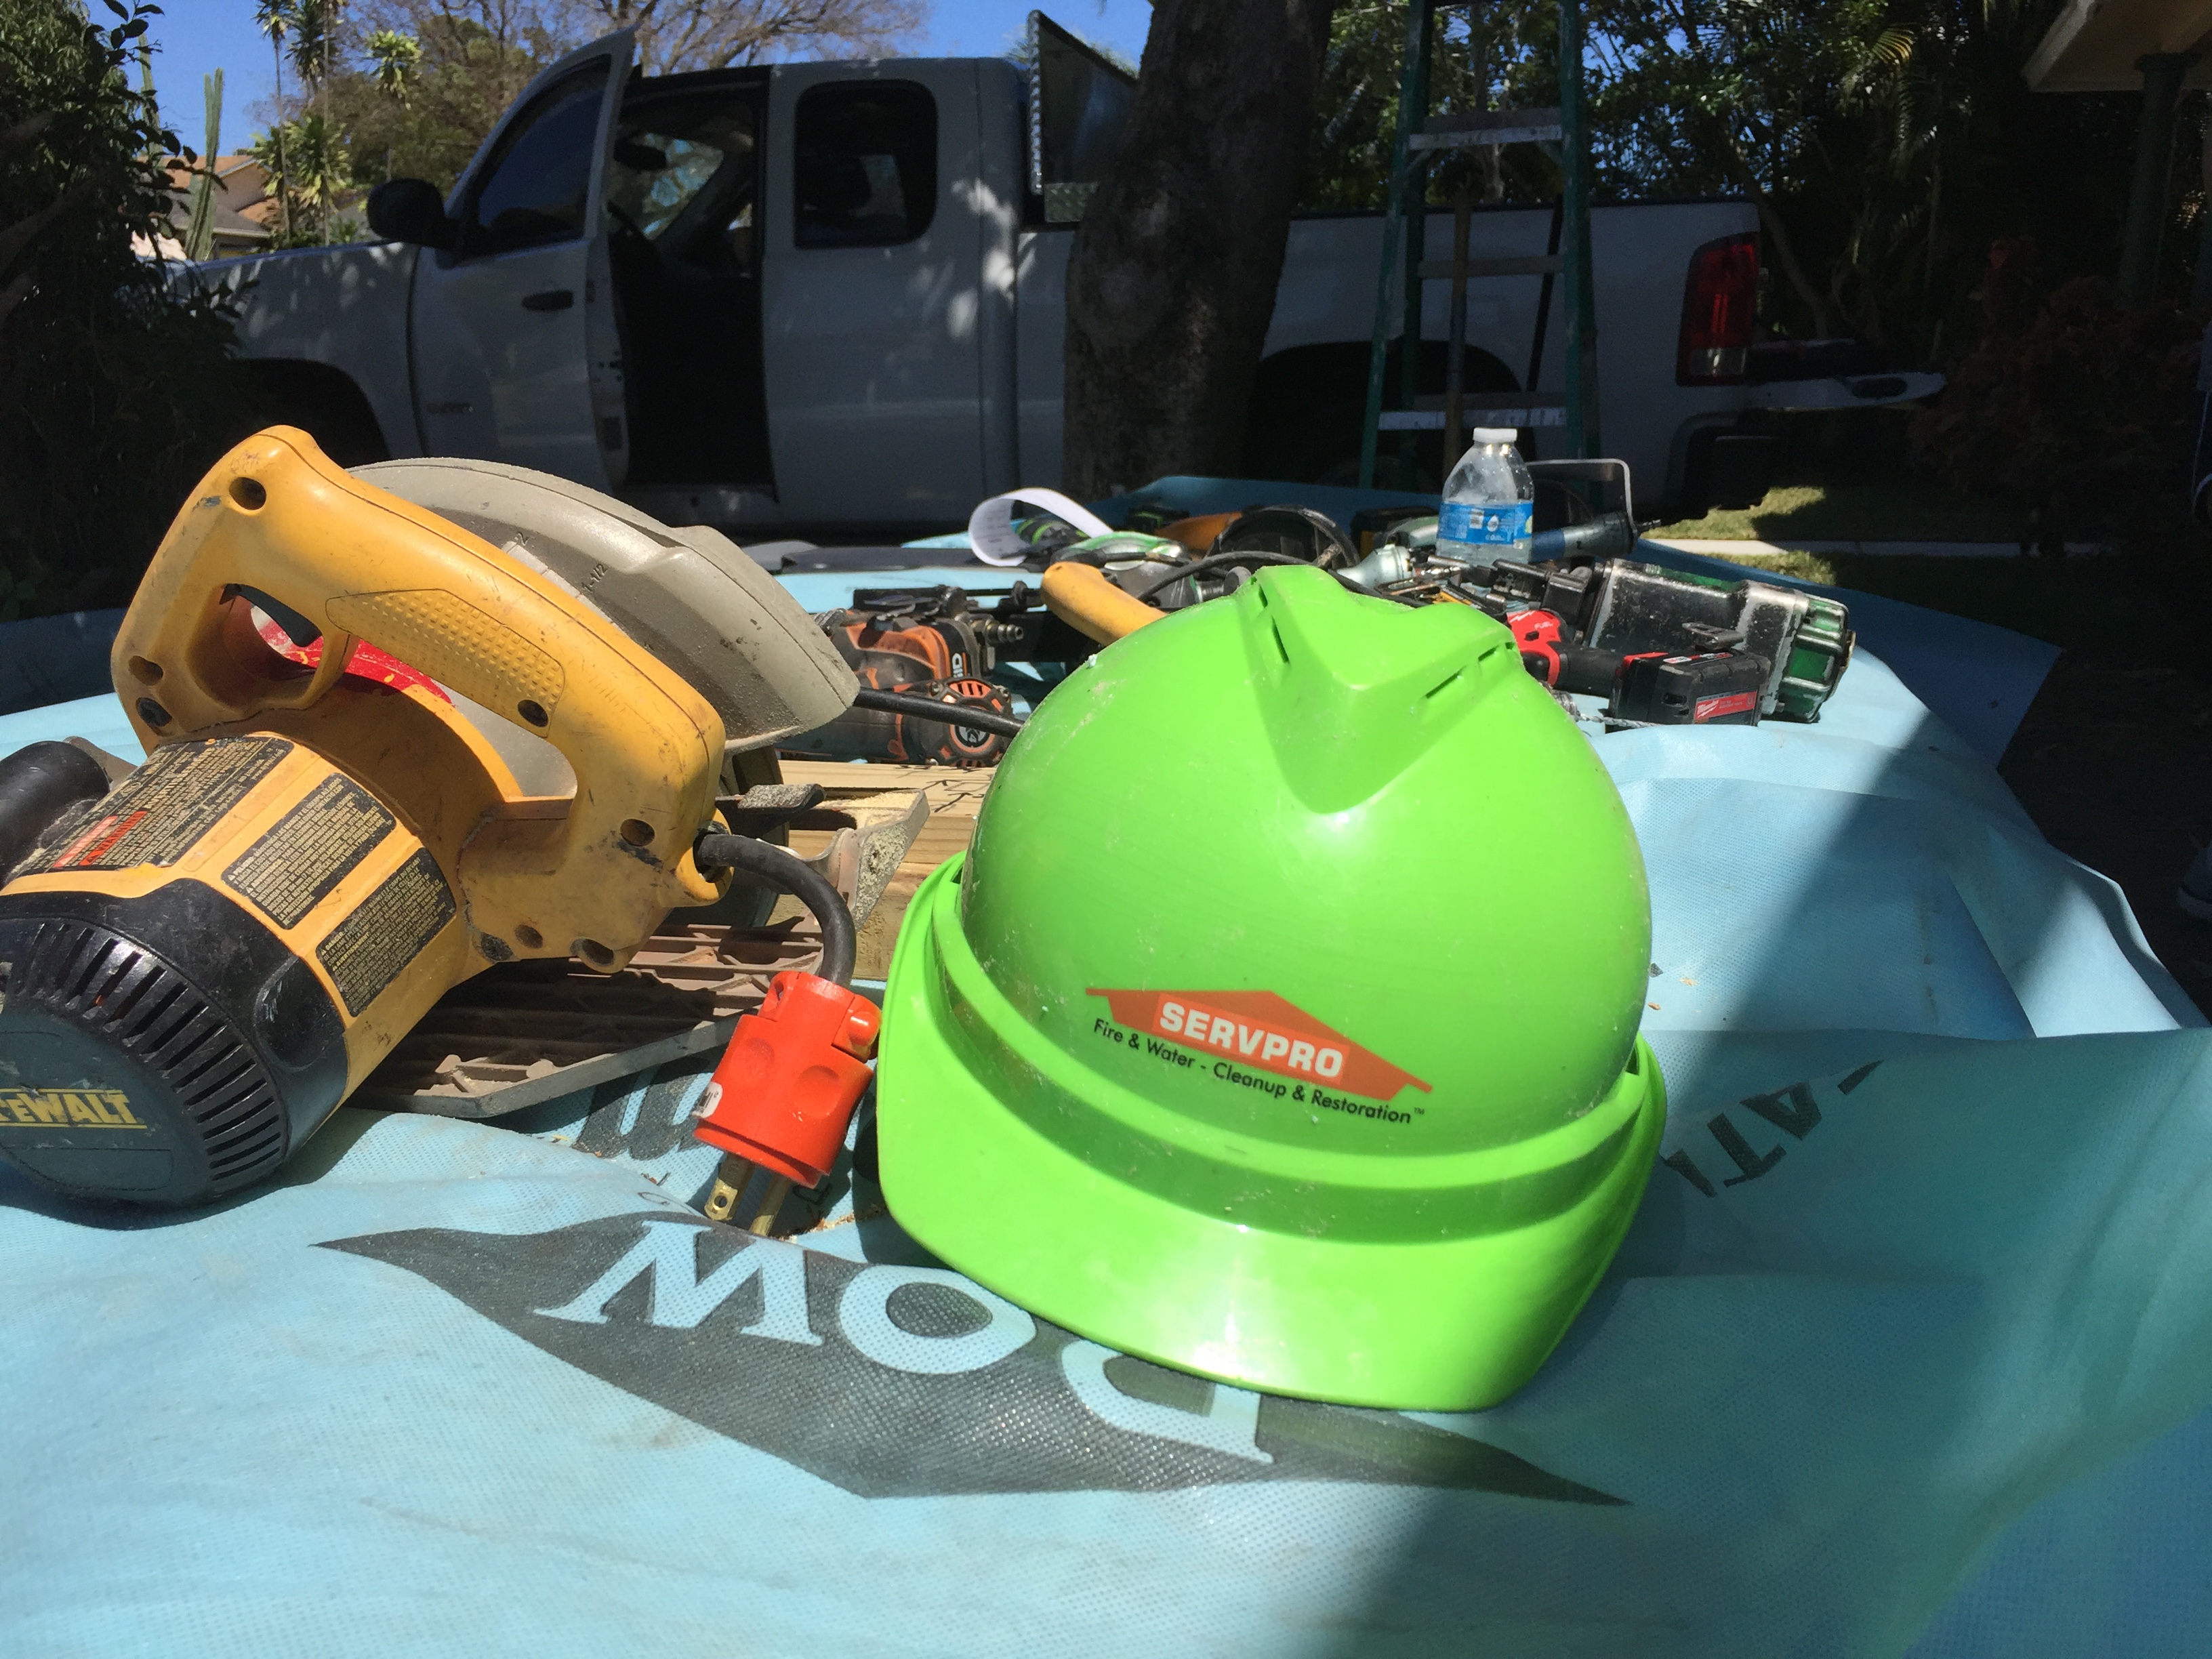 SERVPRO is ready to handle any size disaster - 24 hours a day, 7 days a week!